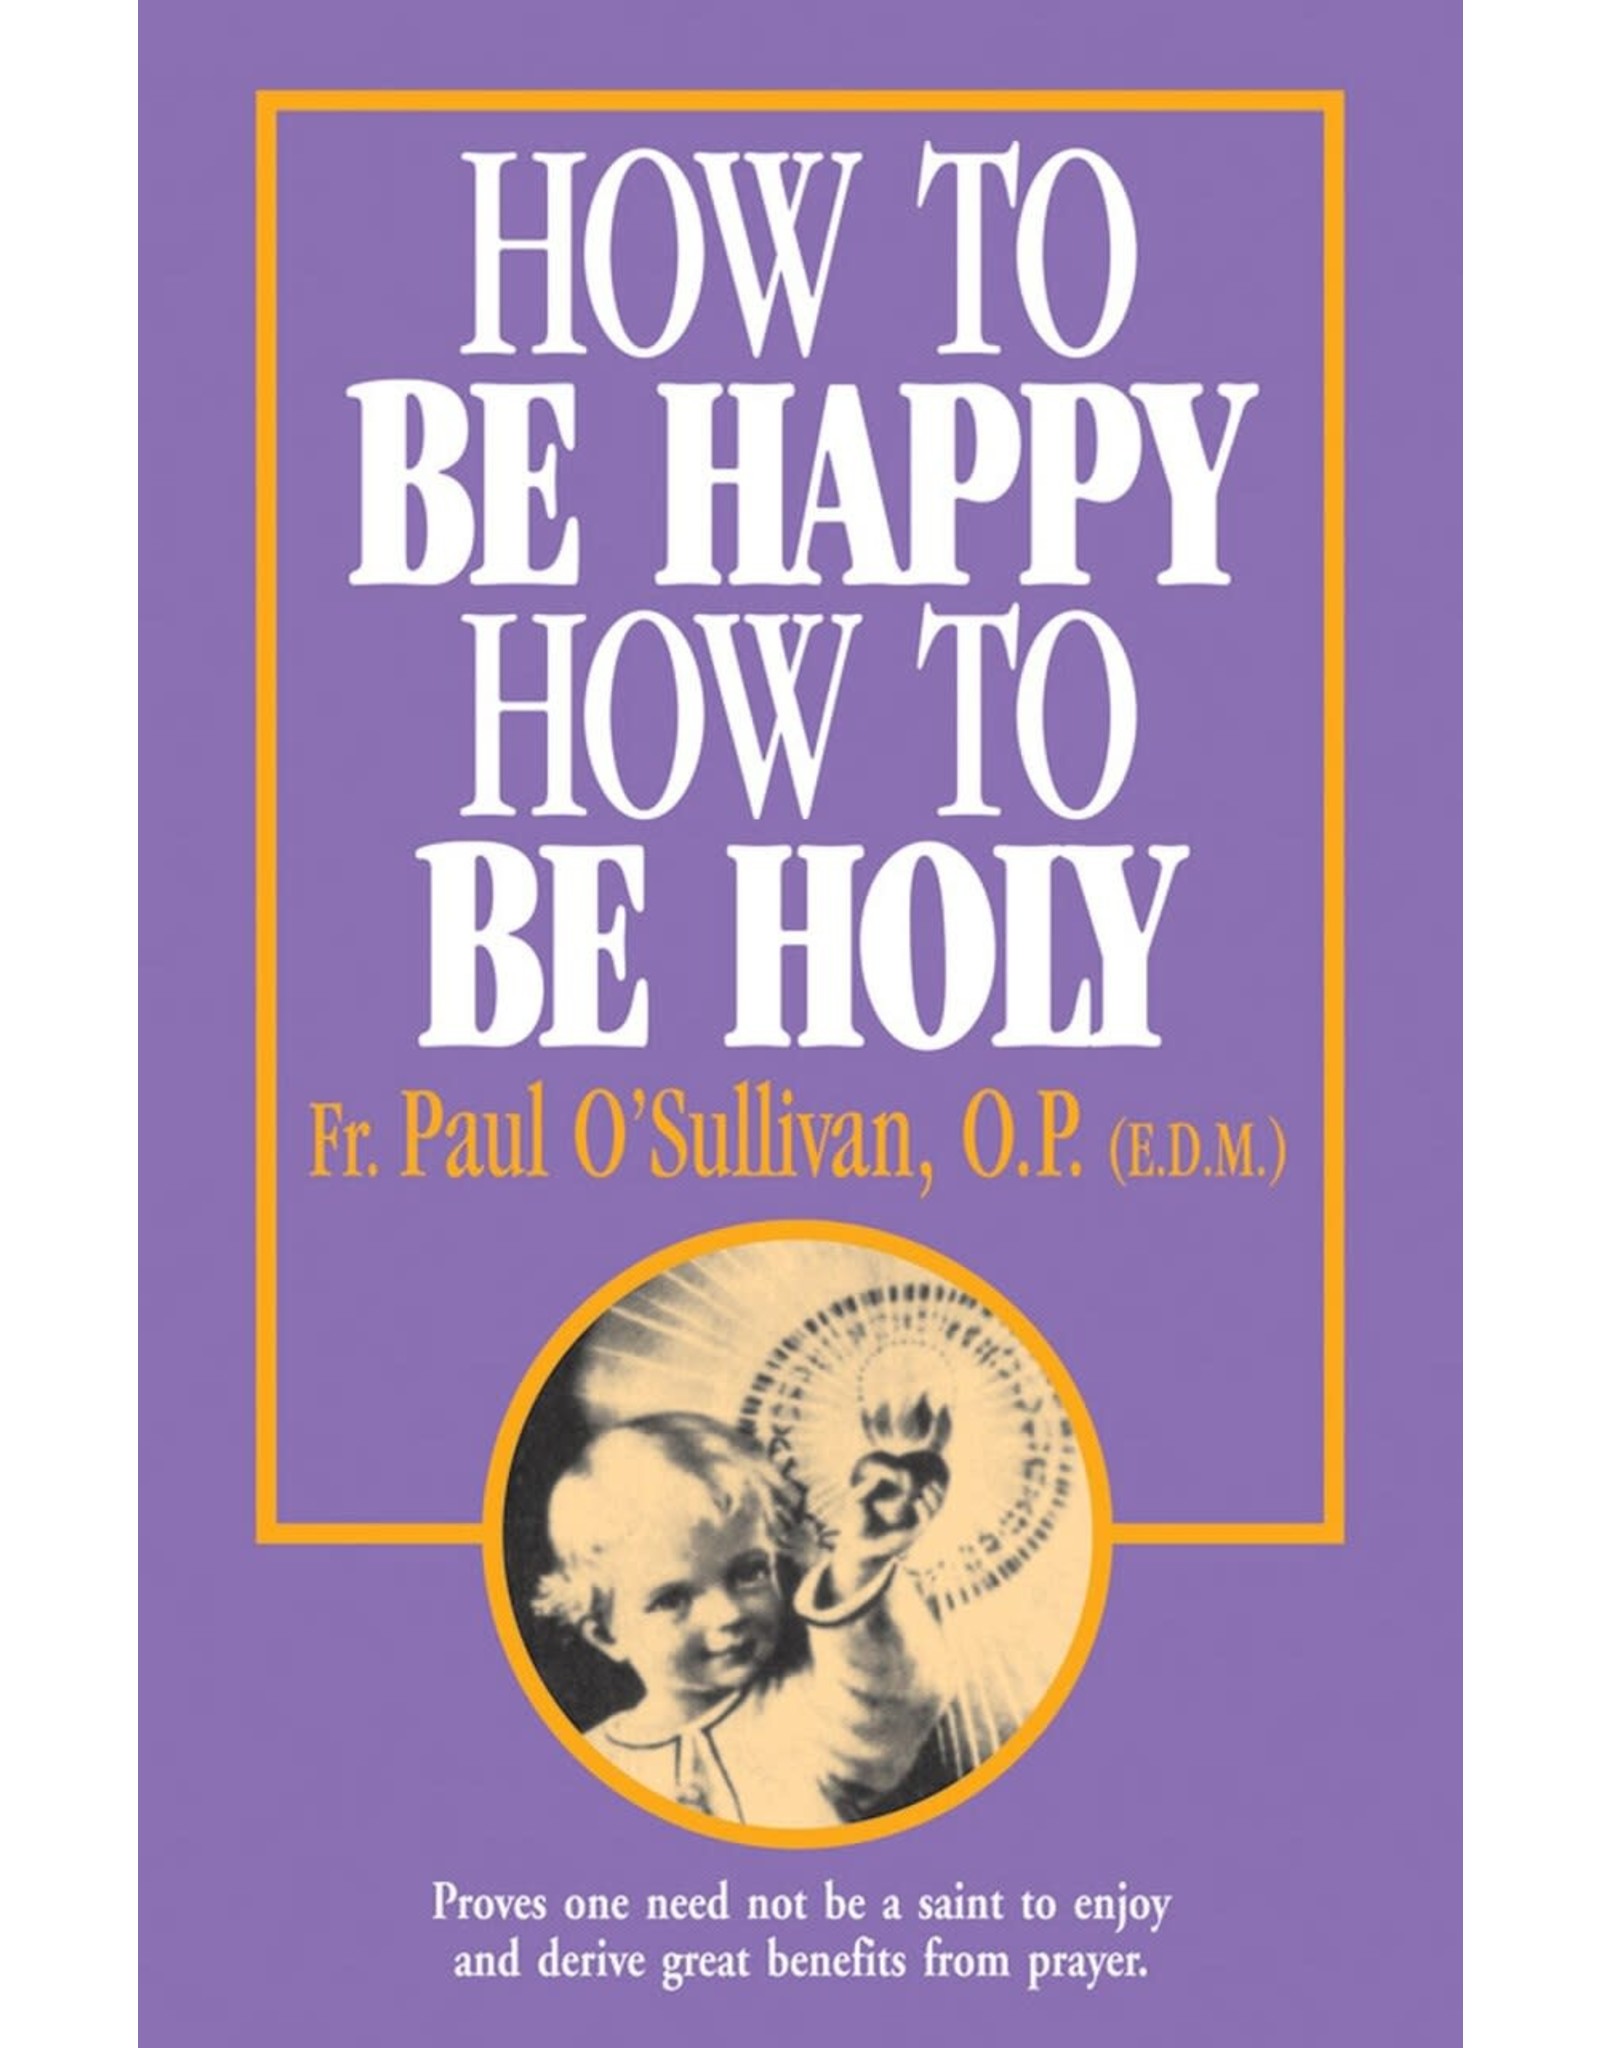 Tan Books How To Be Happy, How To Be Holy by Rev. Fr. Paul O'Sullivan, O.P. (E.D.M.) (Paperback)